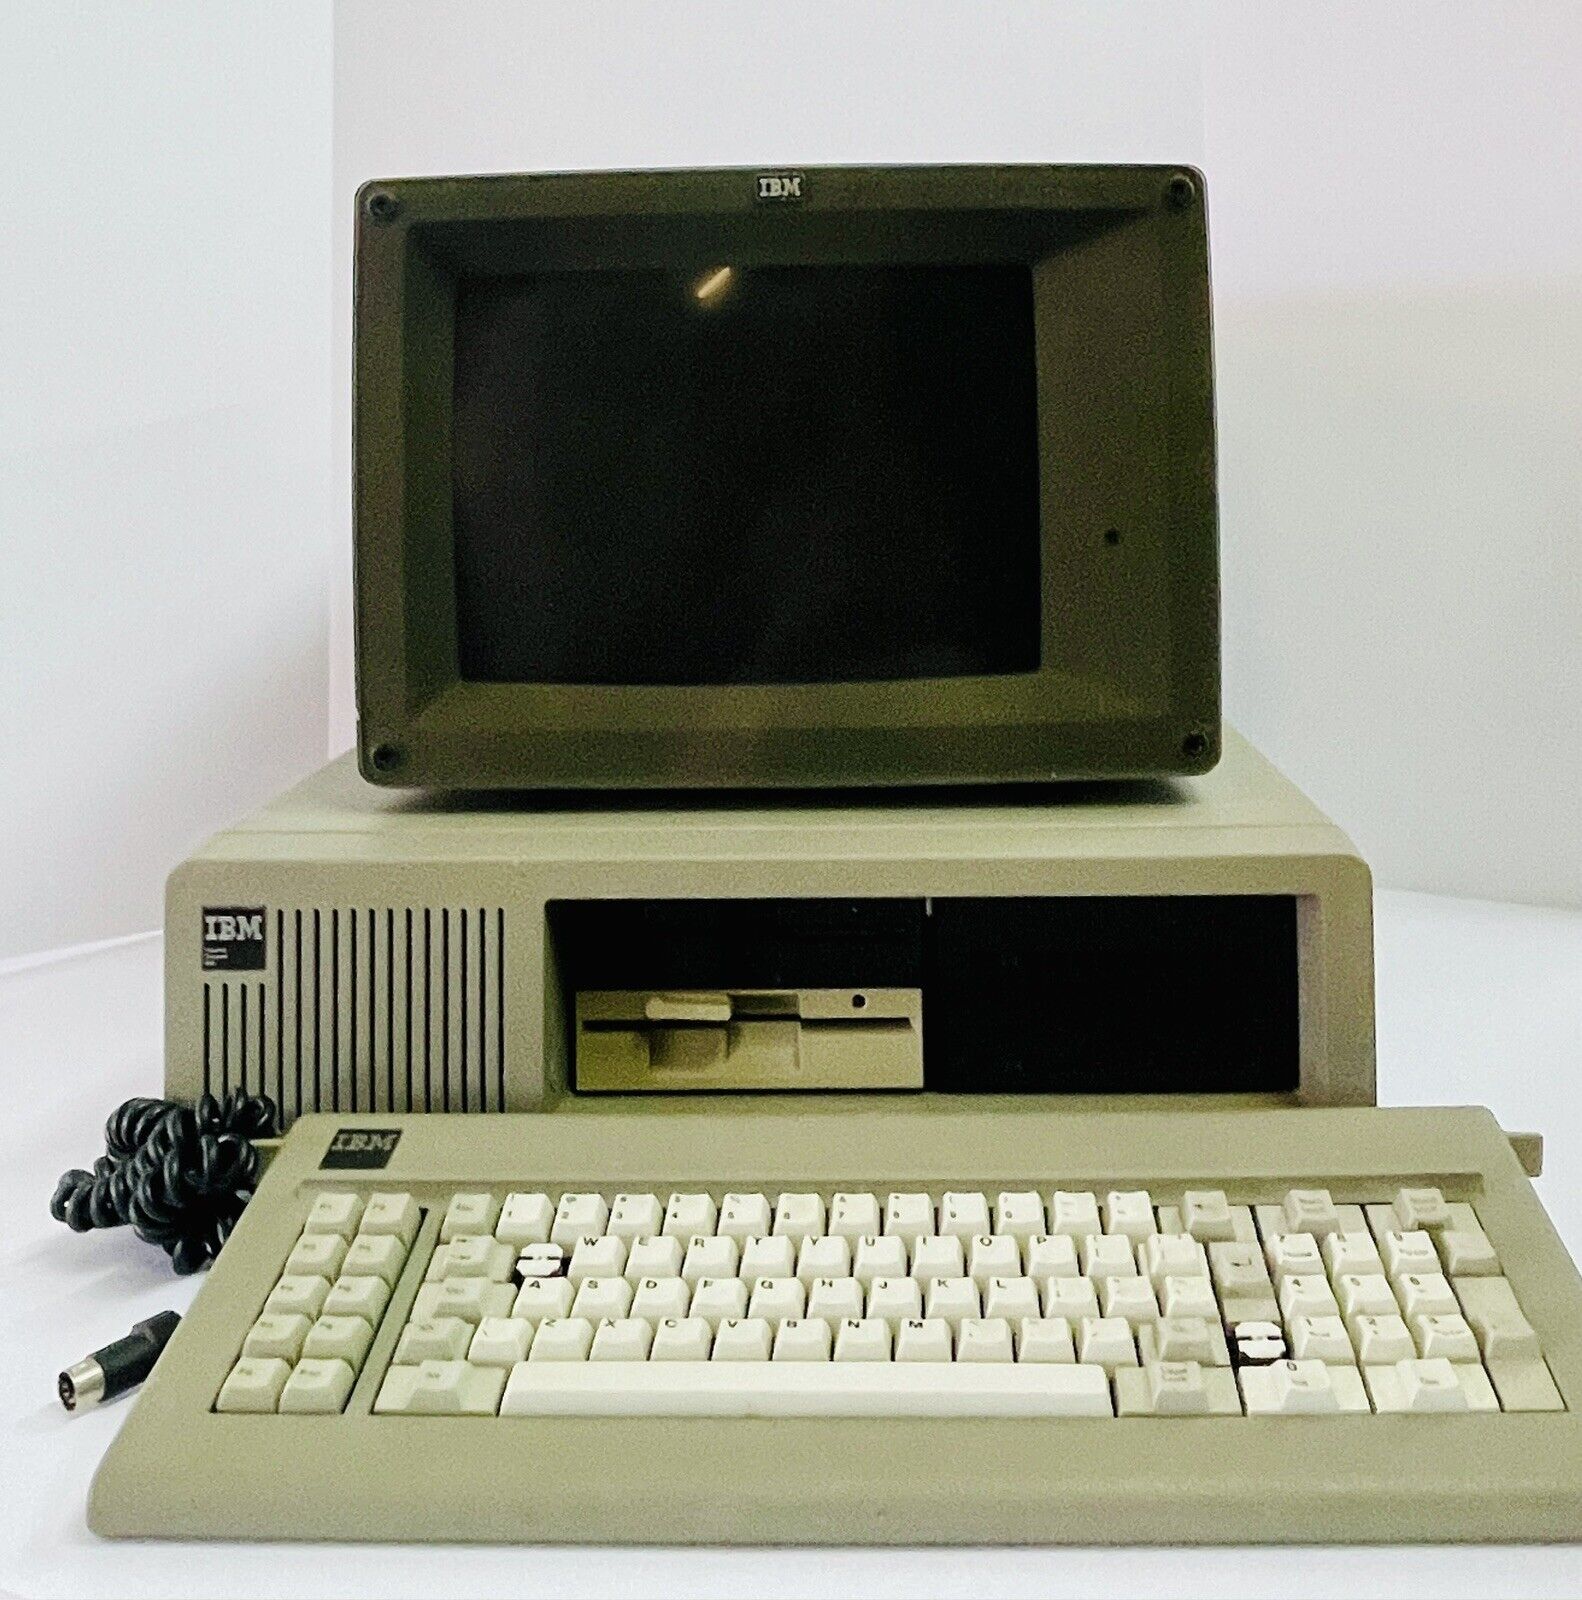 IBM Industrial Computer 5531, Monitor 5532, and Keyboard